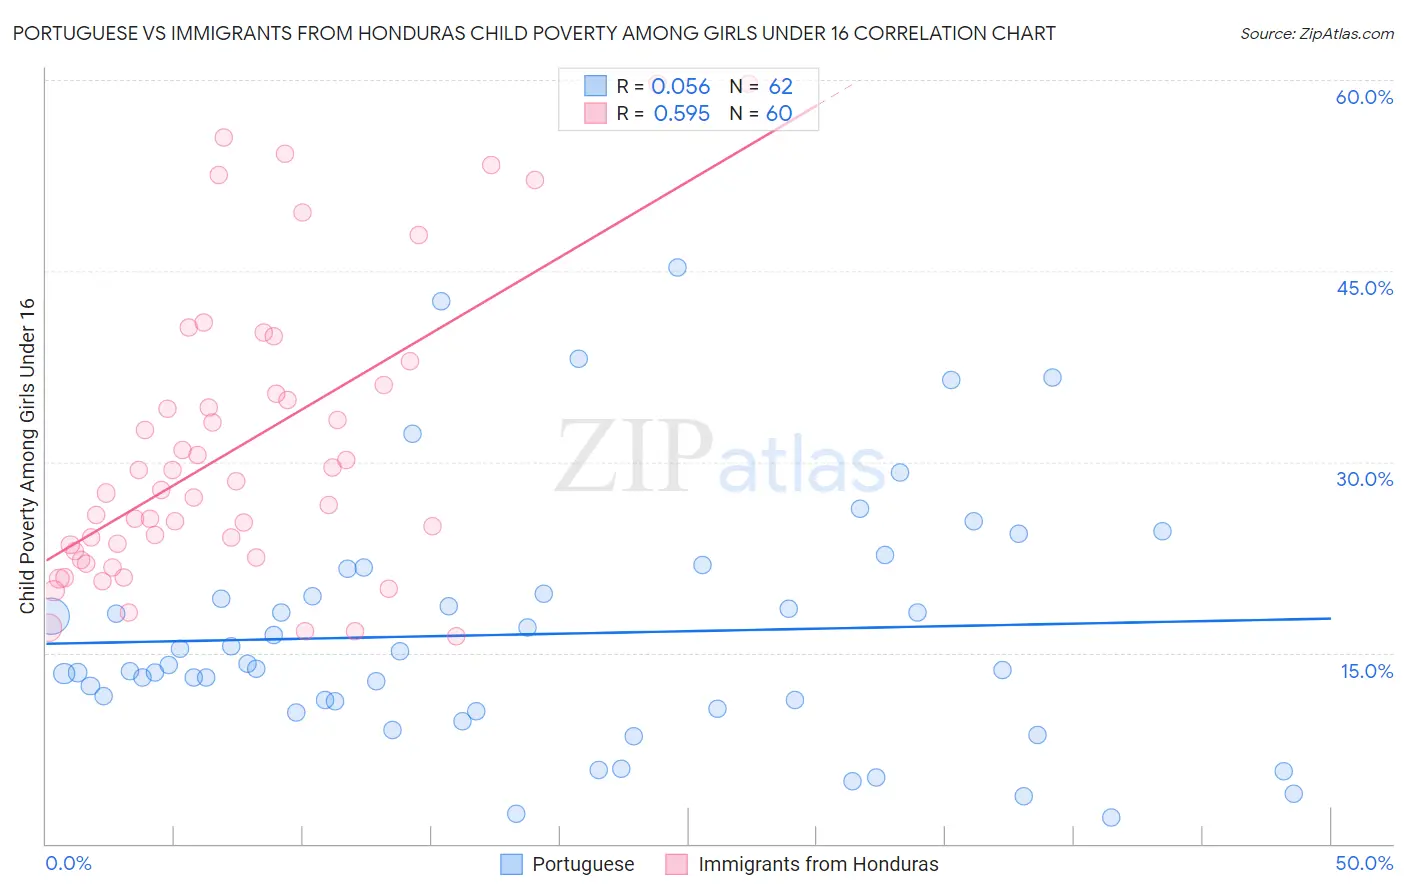 Portuguese vs Immigrants from Honduras Child Poverty Among Girls Under 16